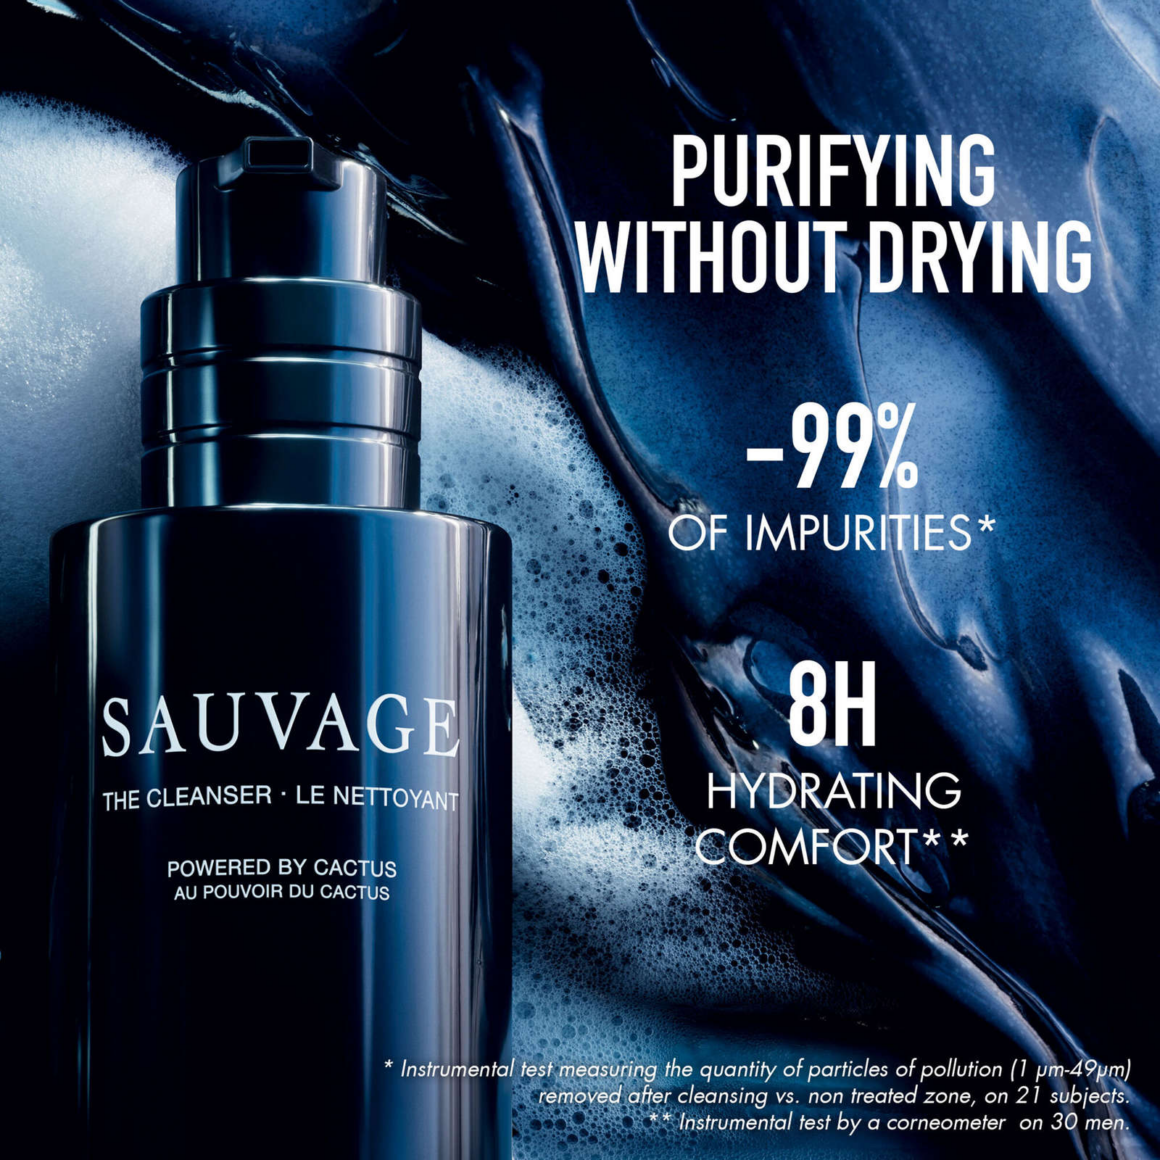 Dior beauty's Sauvage mencare skincare collection line made from Cactus new The Cleaner facts